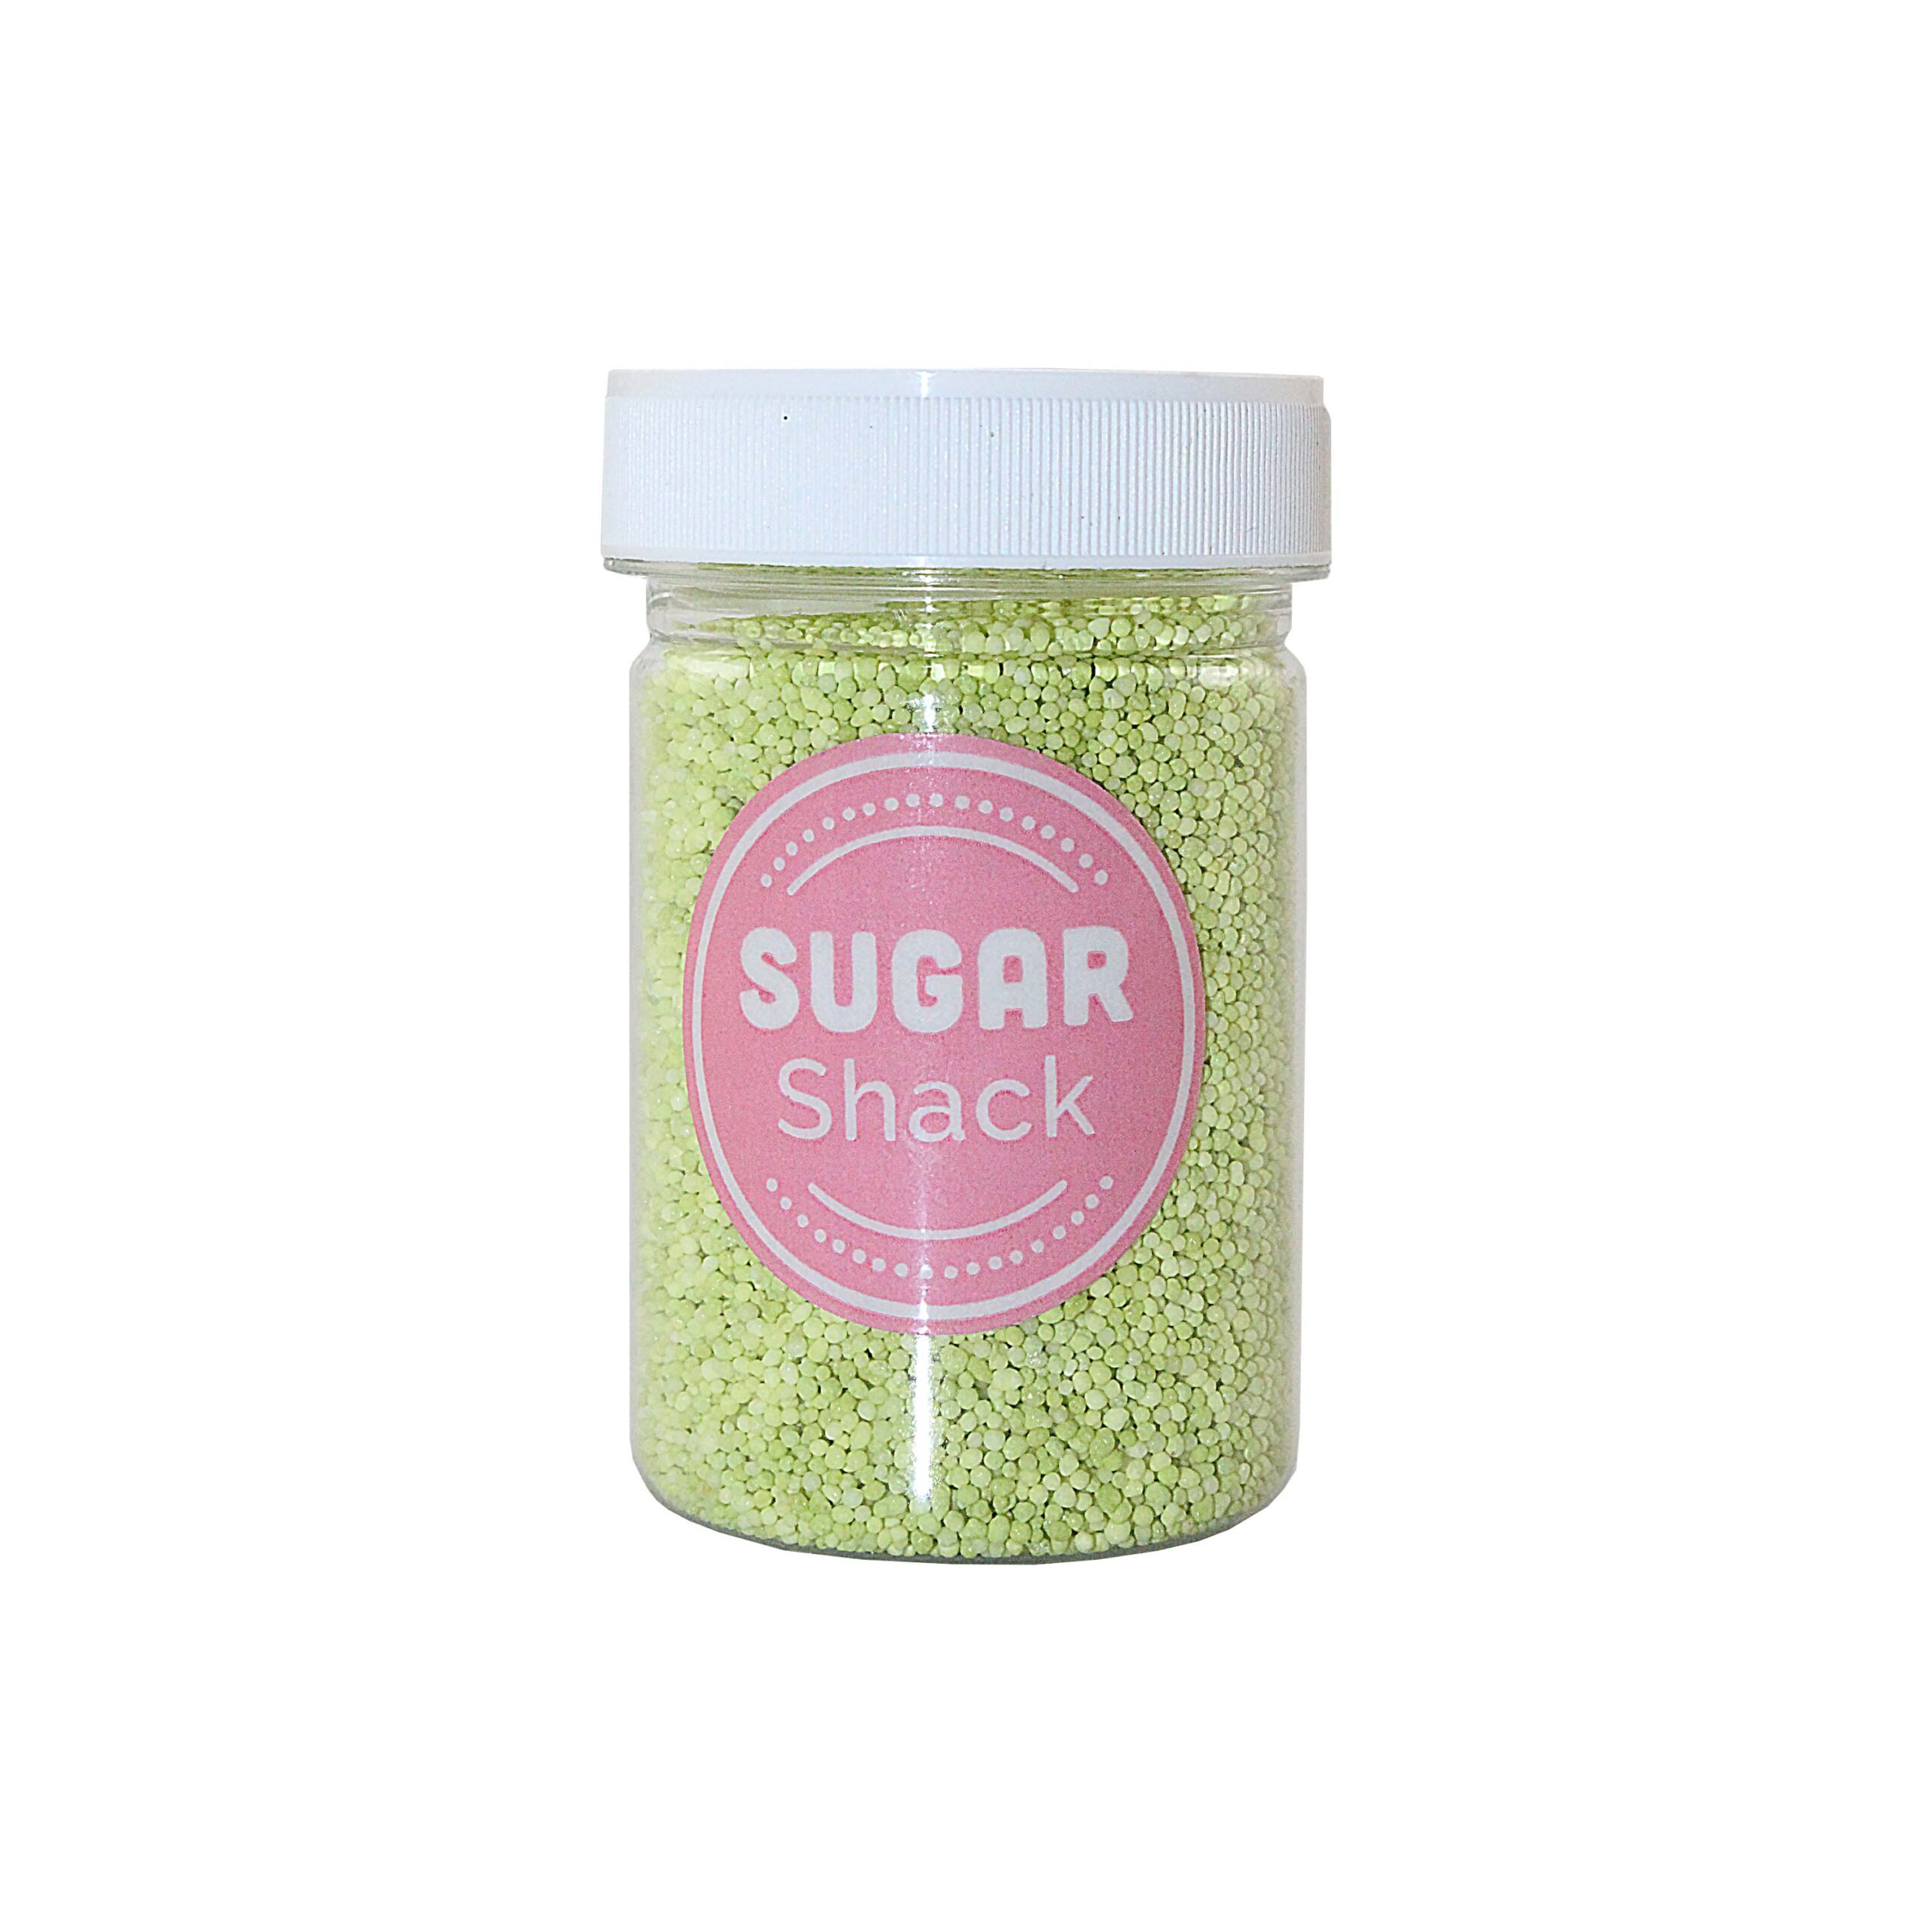 NONPAREILS
SOLID COLOUR
100g LIME GREEN